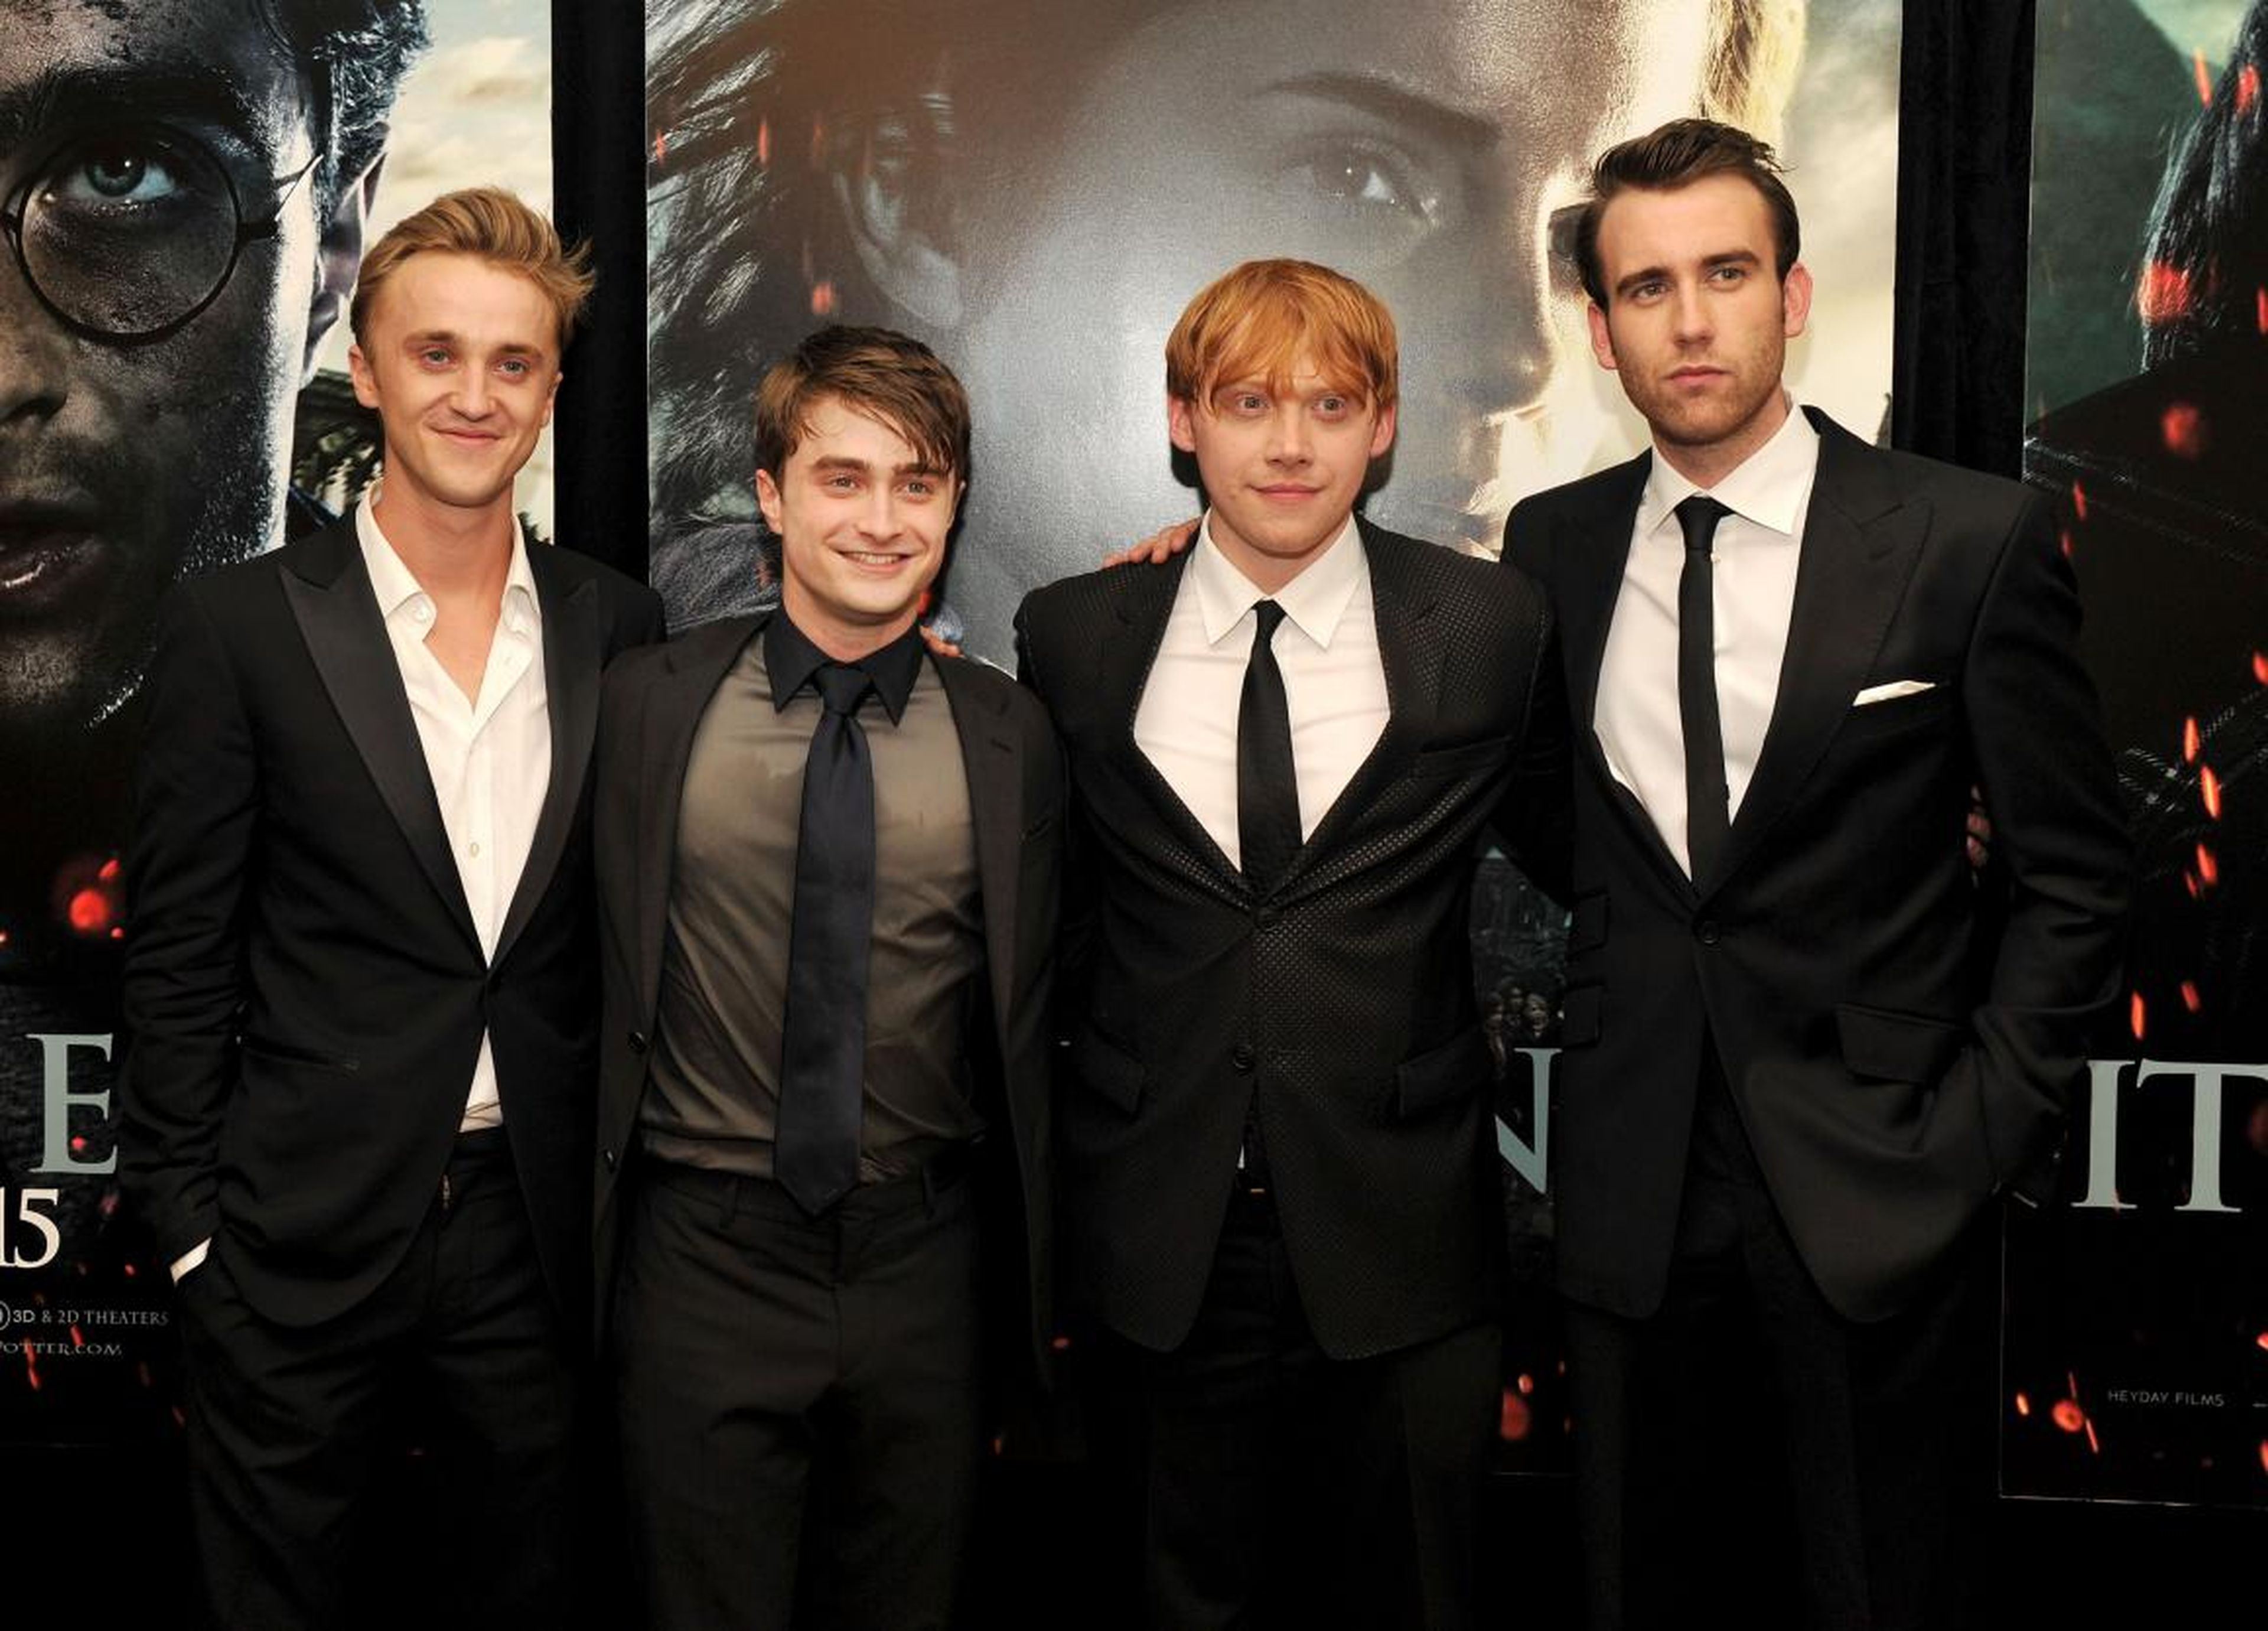 Daniel Radcliffe is among the shortest of the "Harry Potter" group at 5 feet 5 inches tall.